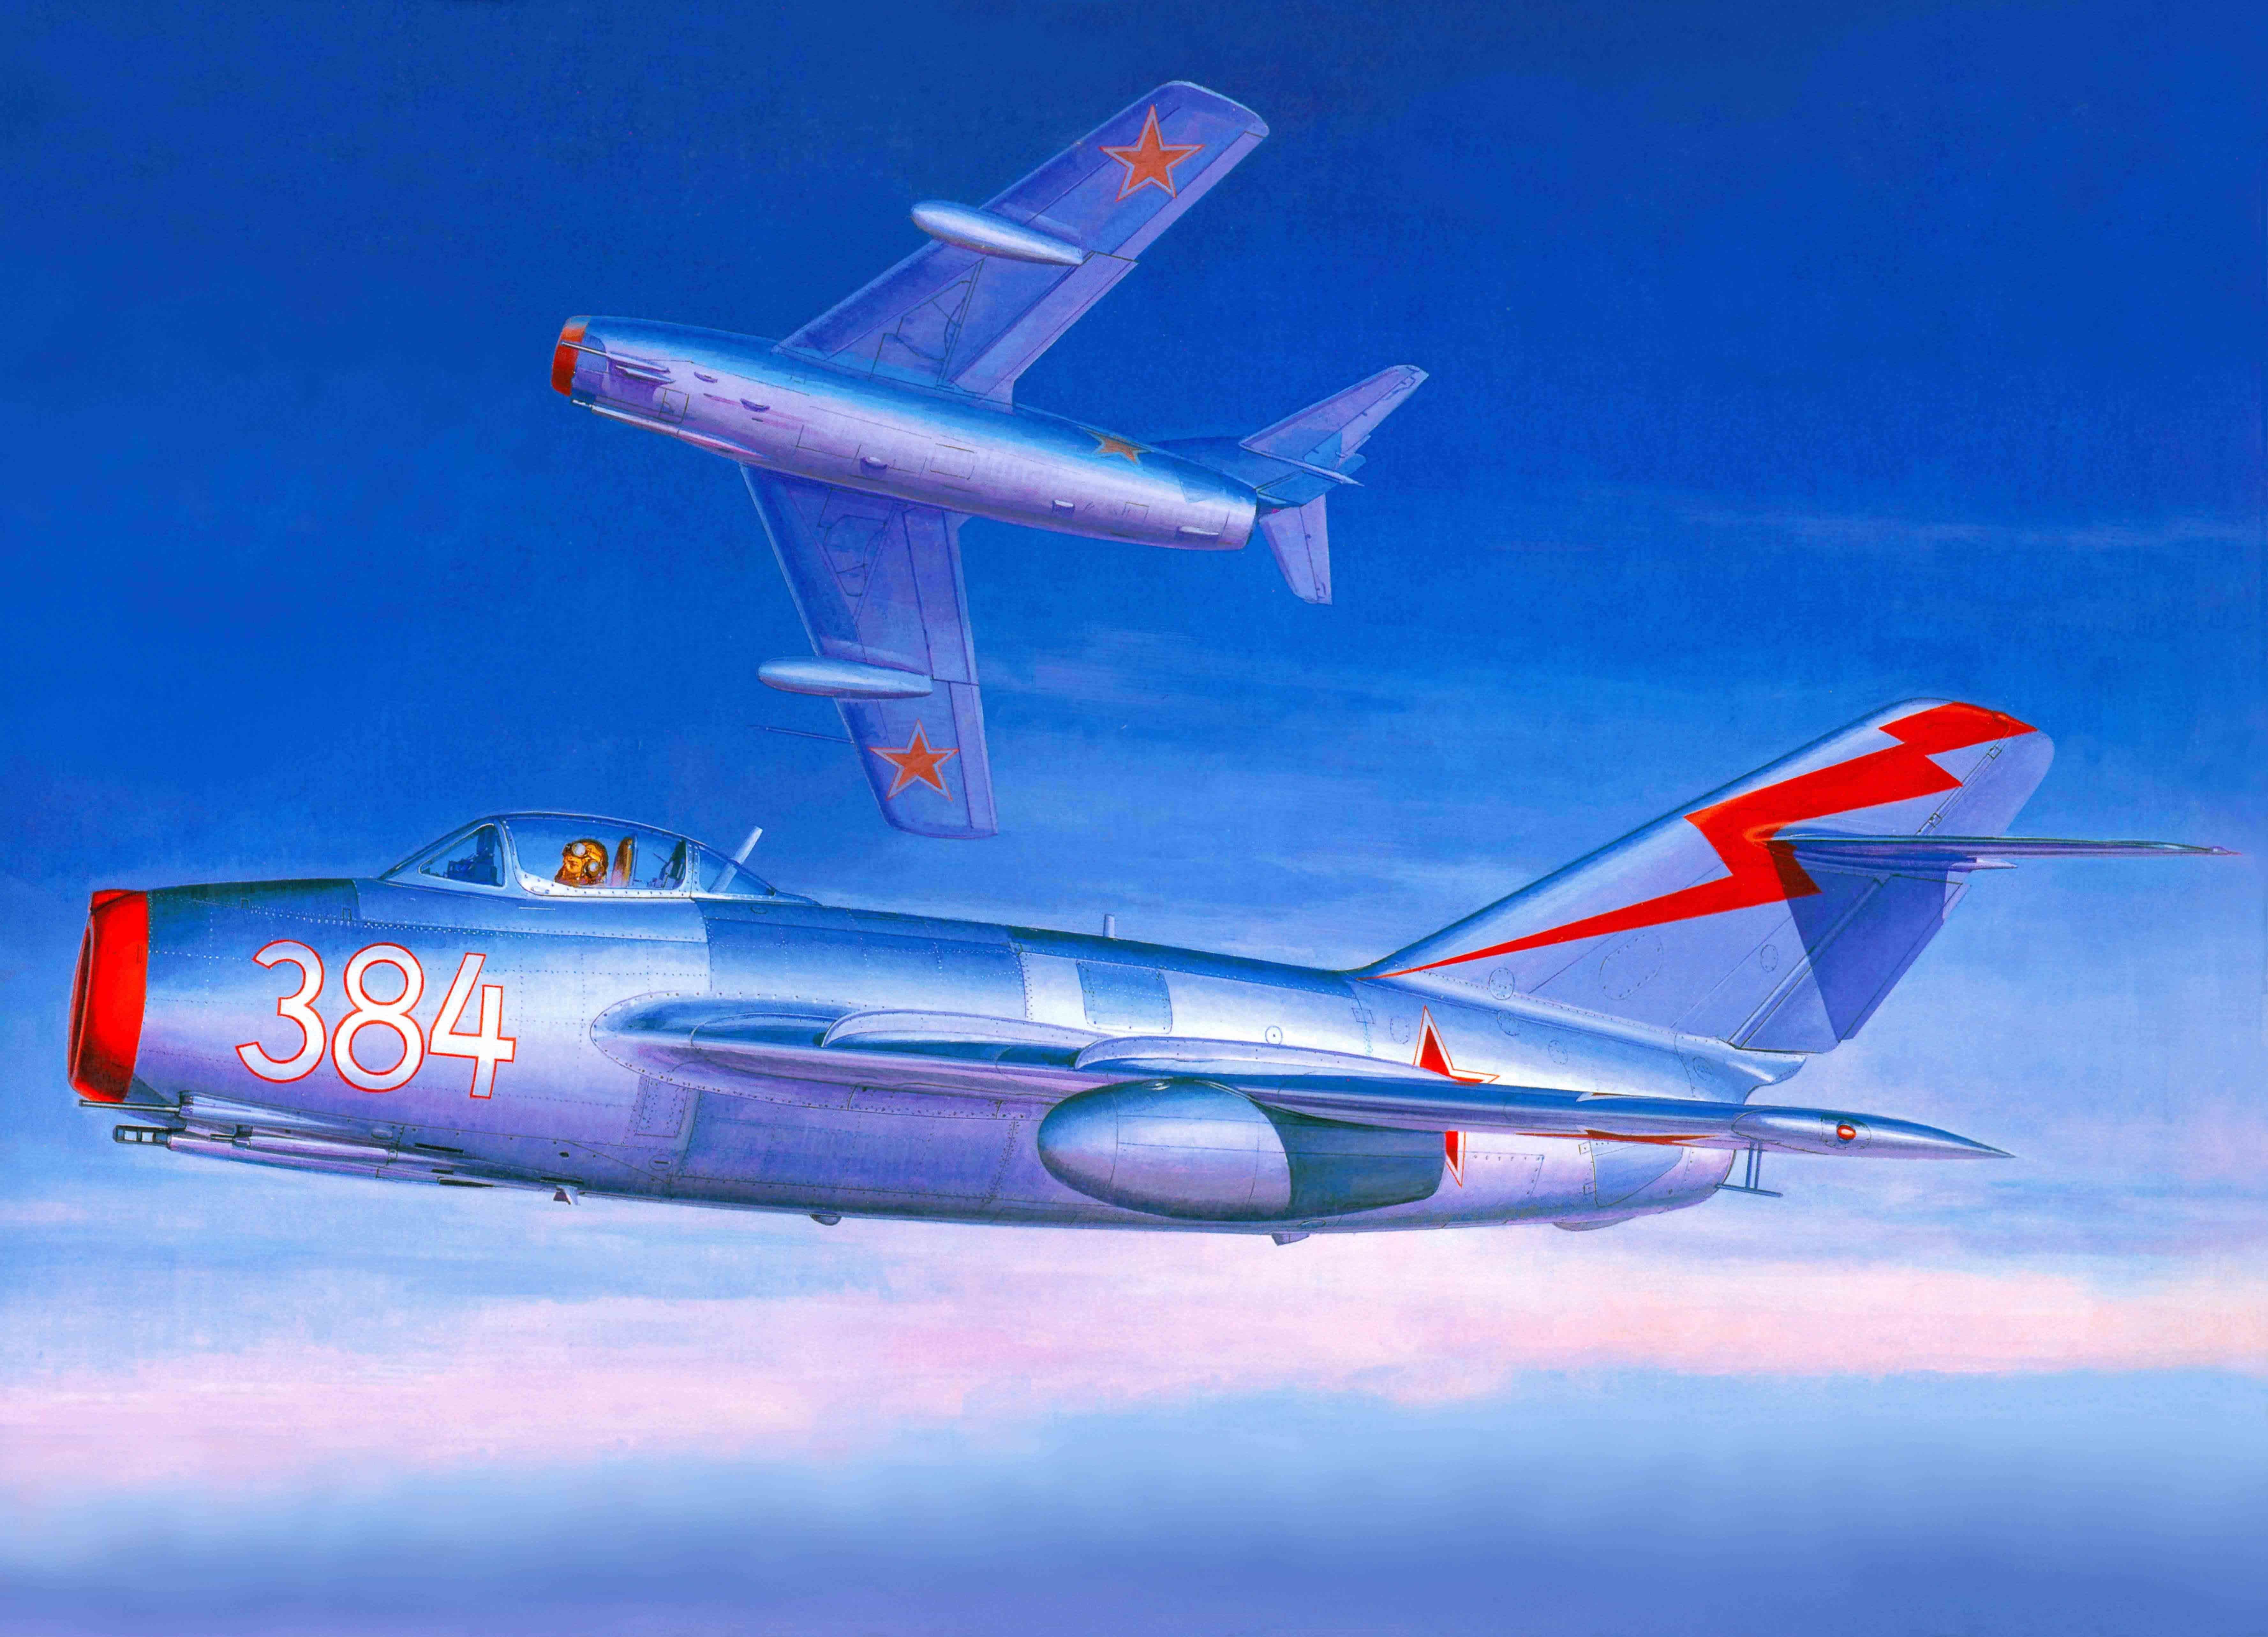 Mig 15s. Gray And Blue 384 Fighter Plane Wallpaper The Plane #fighter #art #combat #BBC #jet The World #c. Fighter Planes, Aviation Art, Russian Military Aircraft